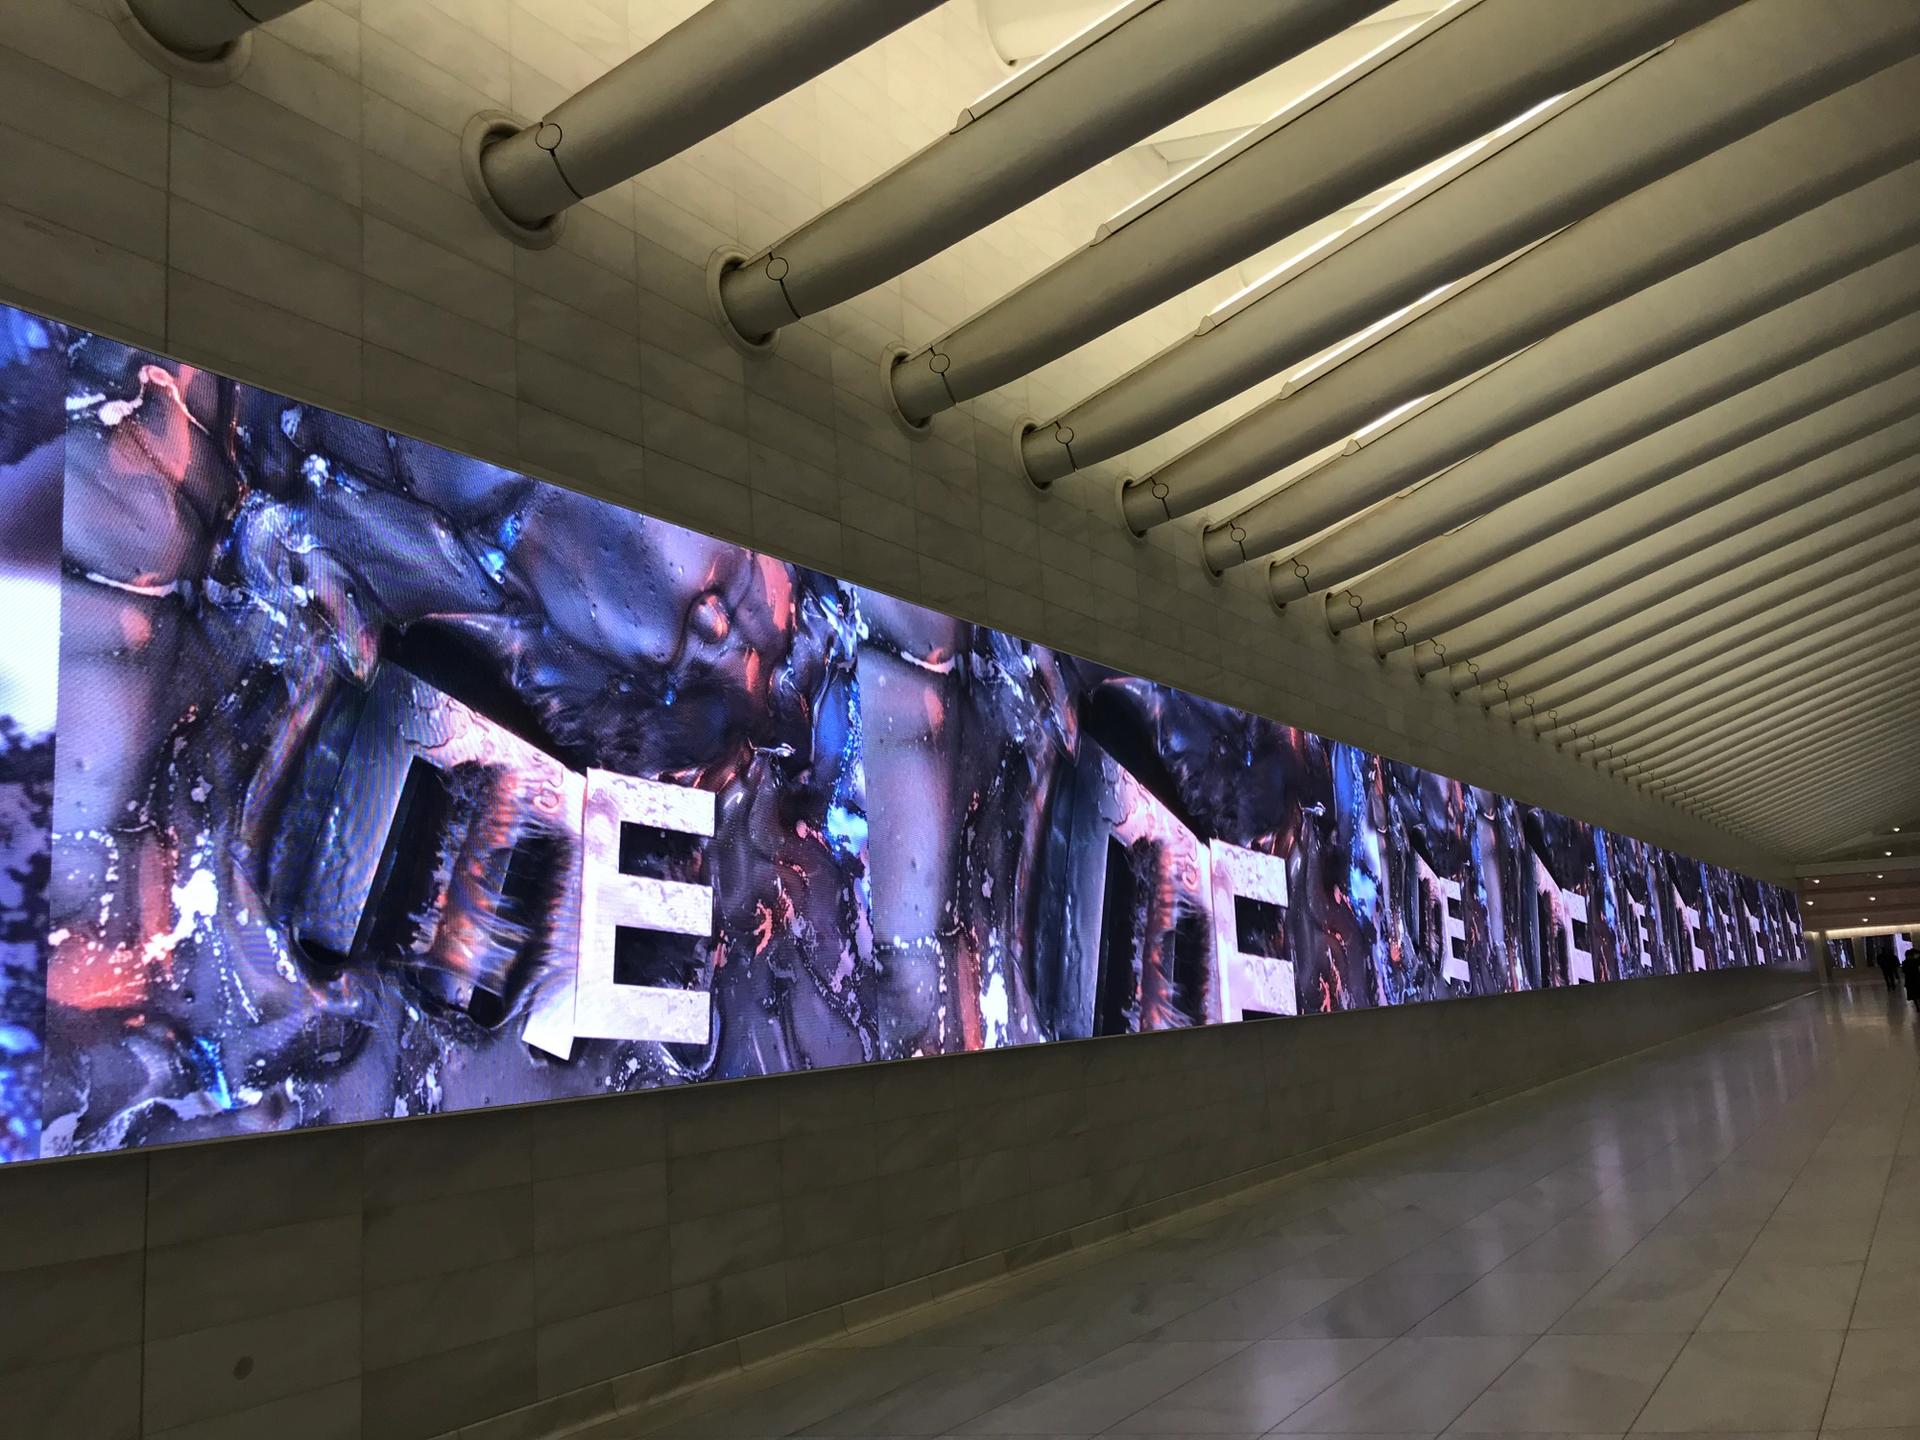 Marilyn Minter's video I'm Not Much But I'm All I Think I Am on view at the Oculus courtesy the artist and Art Production Fund